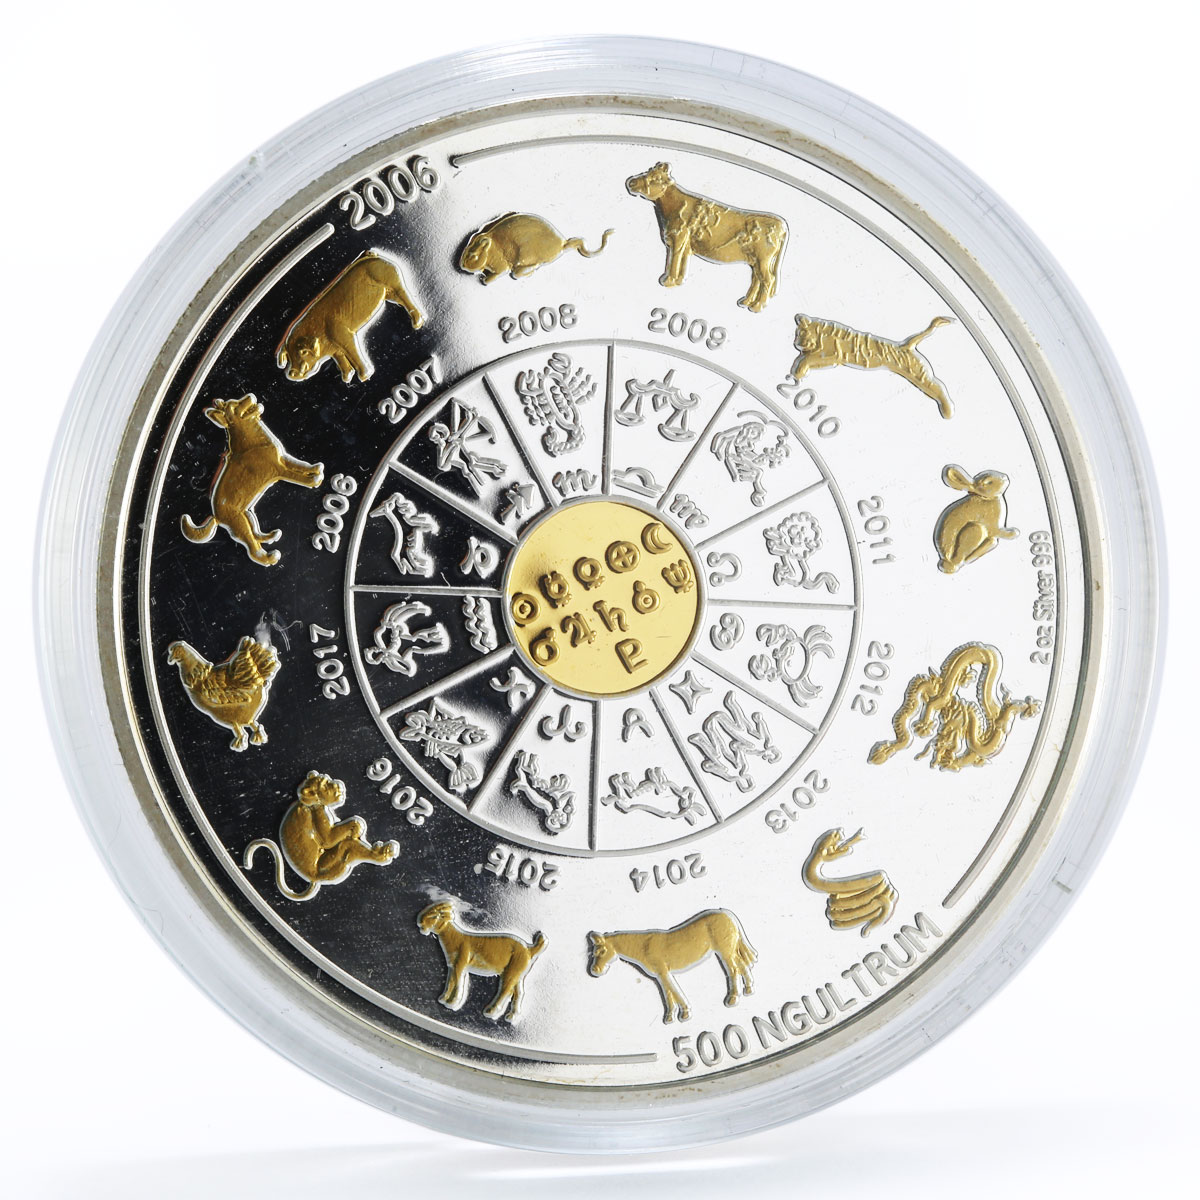 Bhutan 500 ngultrums Sings of the Zodiac proof gilded silver coin 2006